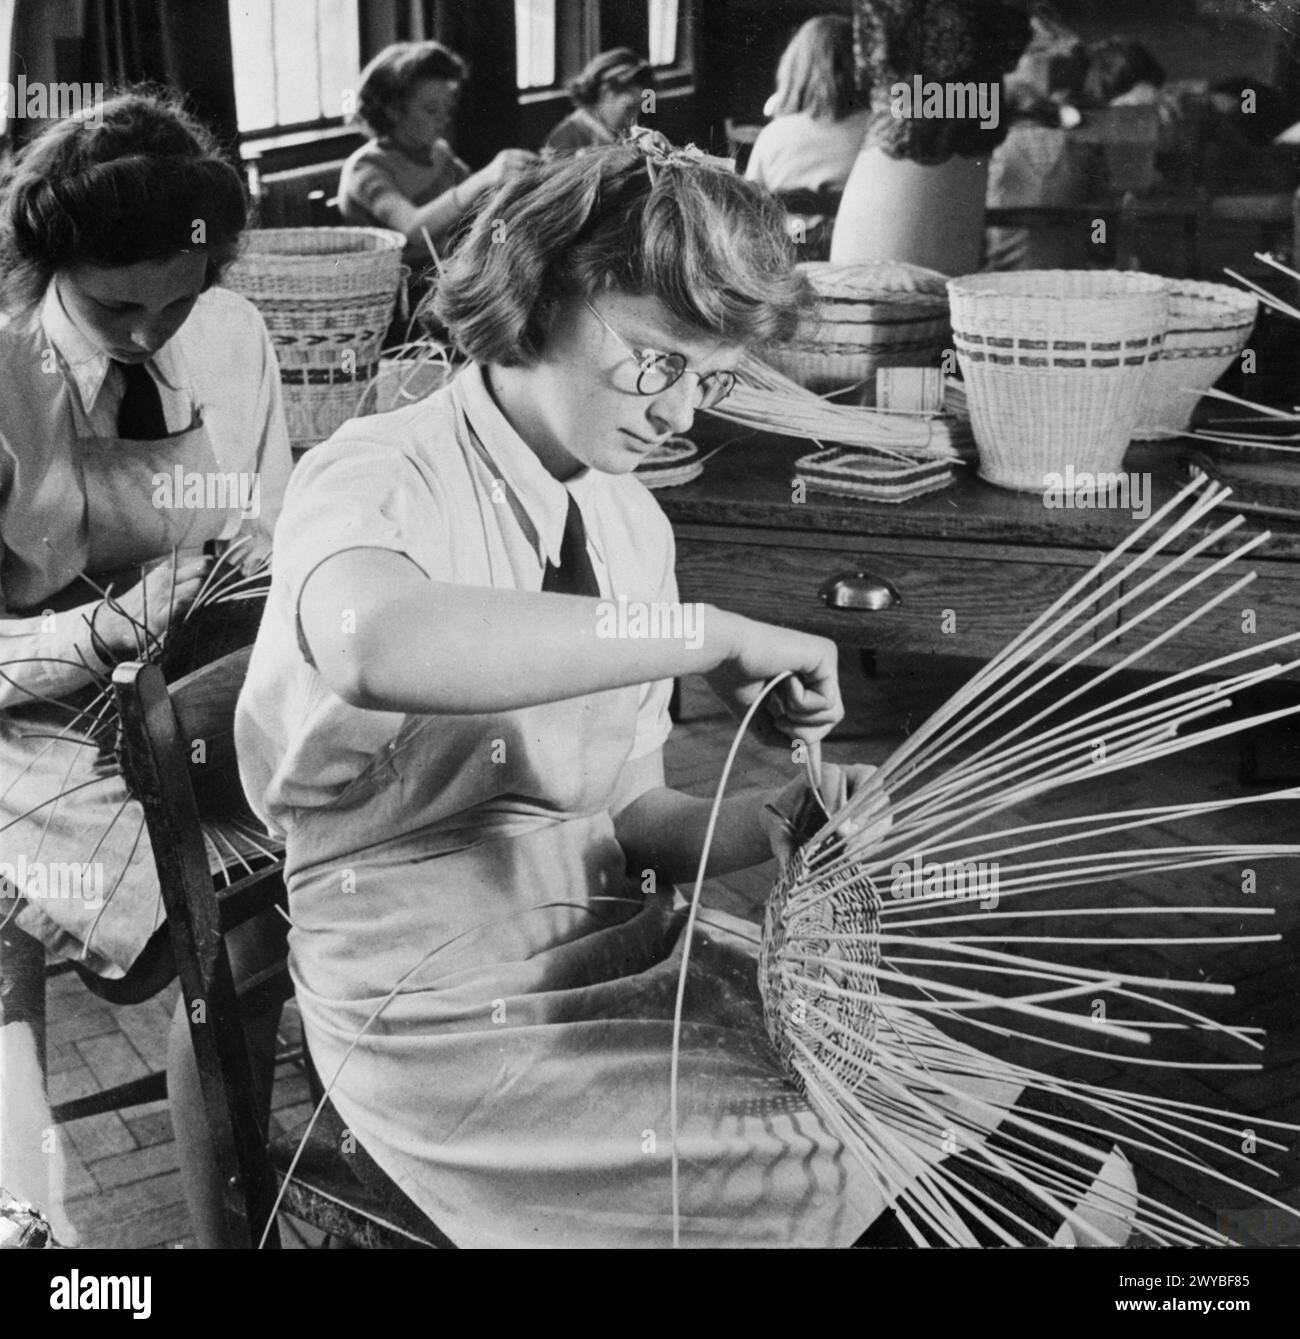 COUNTRY SCHOOL: EVERYDAY LIFE AT BALDOCK COUNTY COUNCIL SCHOOL, BALDOCK, HERTFORDSHIRE, ENGLAND, UK, 1944 - A group of girls busy at work during a lesson on basket-making at Baldock County Council School. They are weaving the wicker strands to make waste paper baskets. , Stock Photo